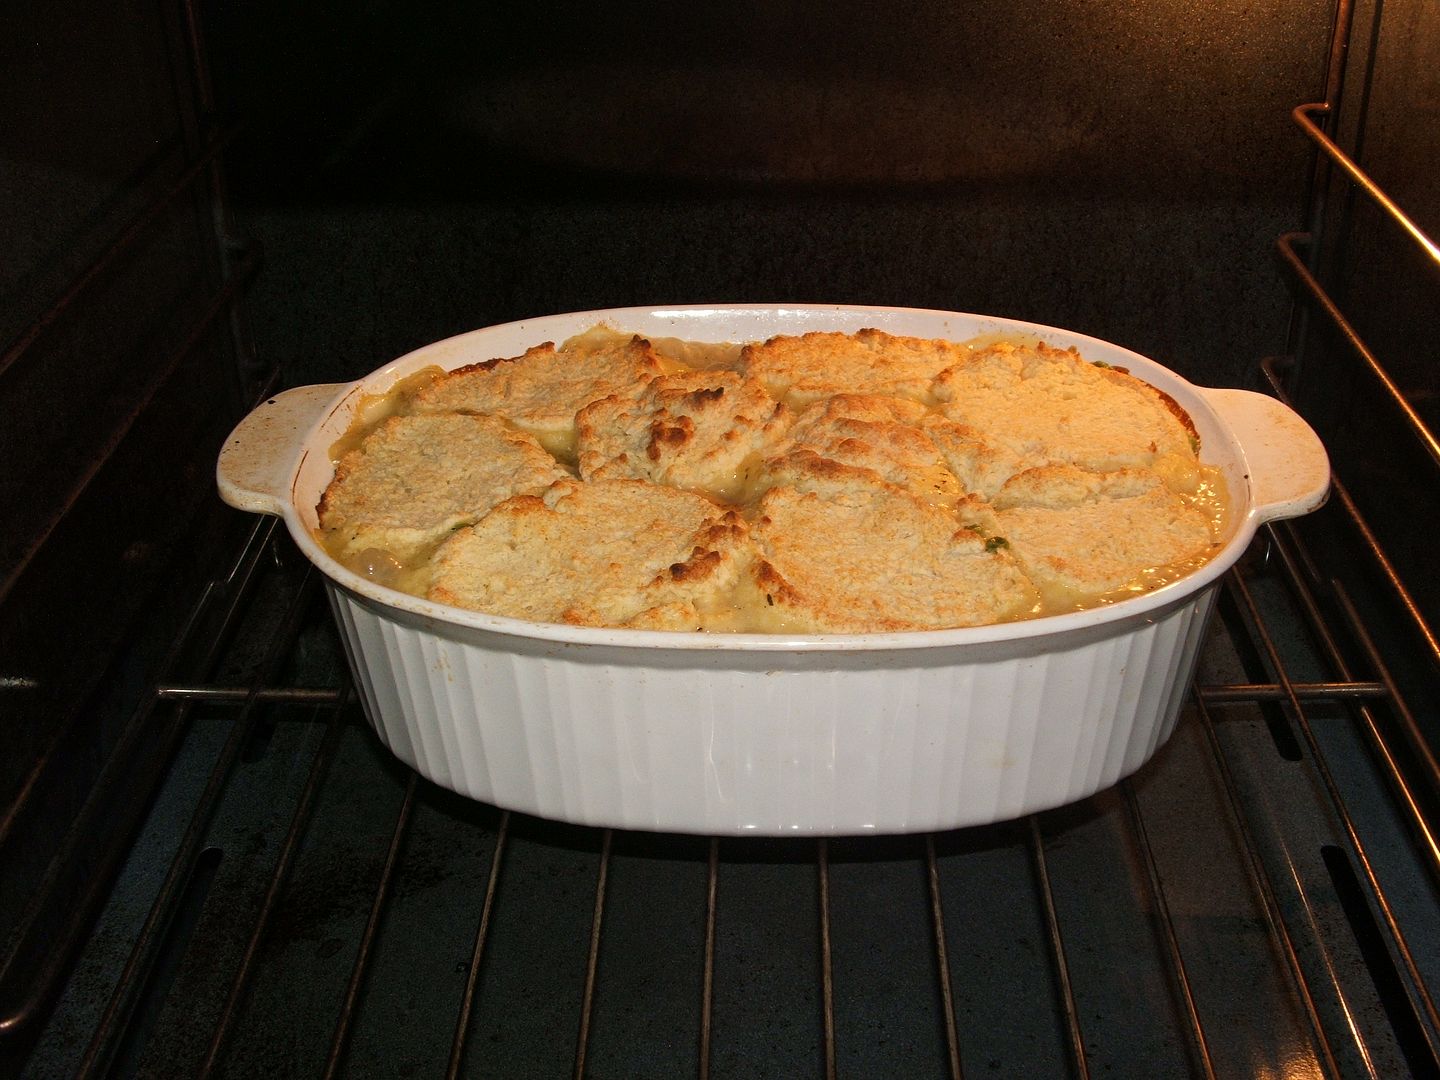 Springtime Chicken Pot Pie by Angie Ouellette-Tower for godsgrowinggarden.com photo 010_zps0d7716f3.jpg